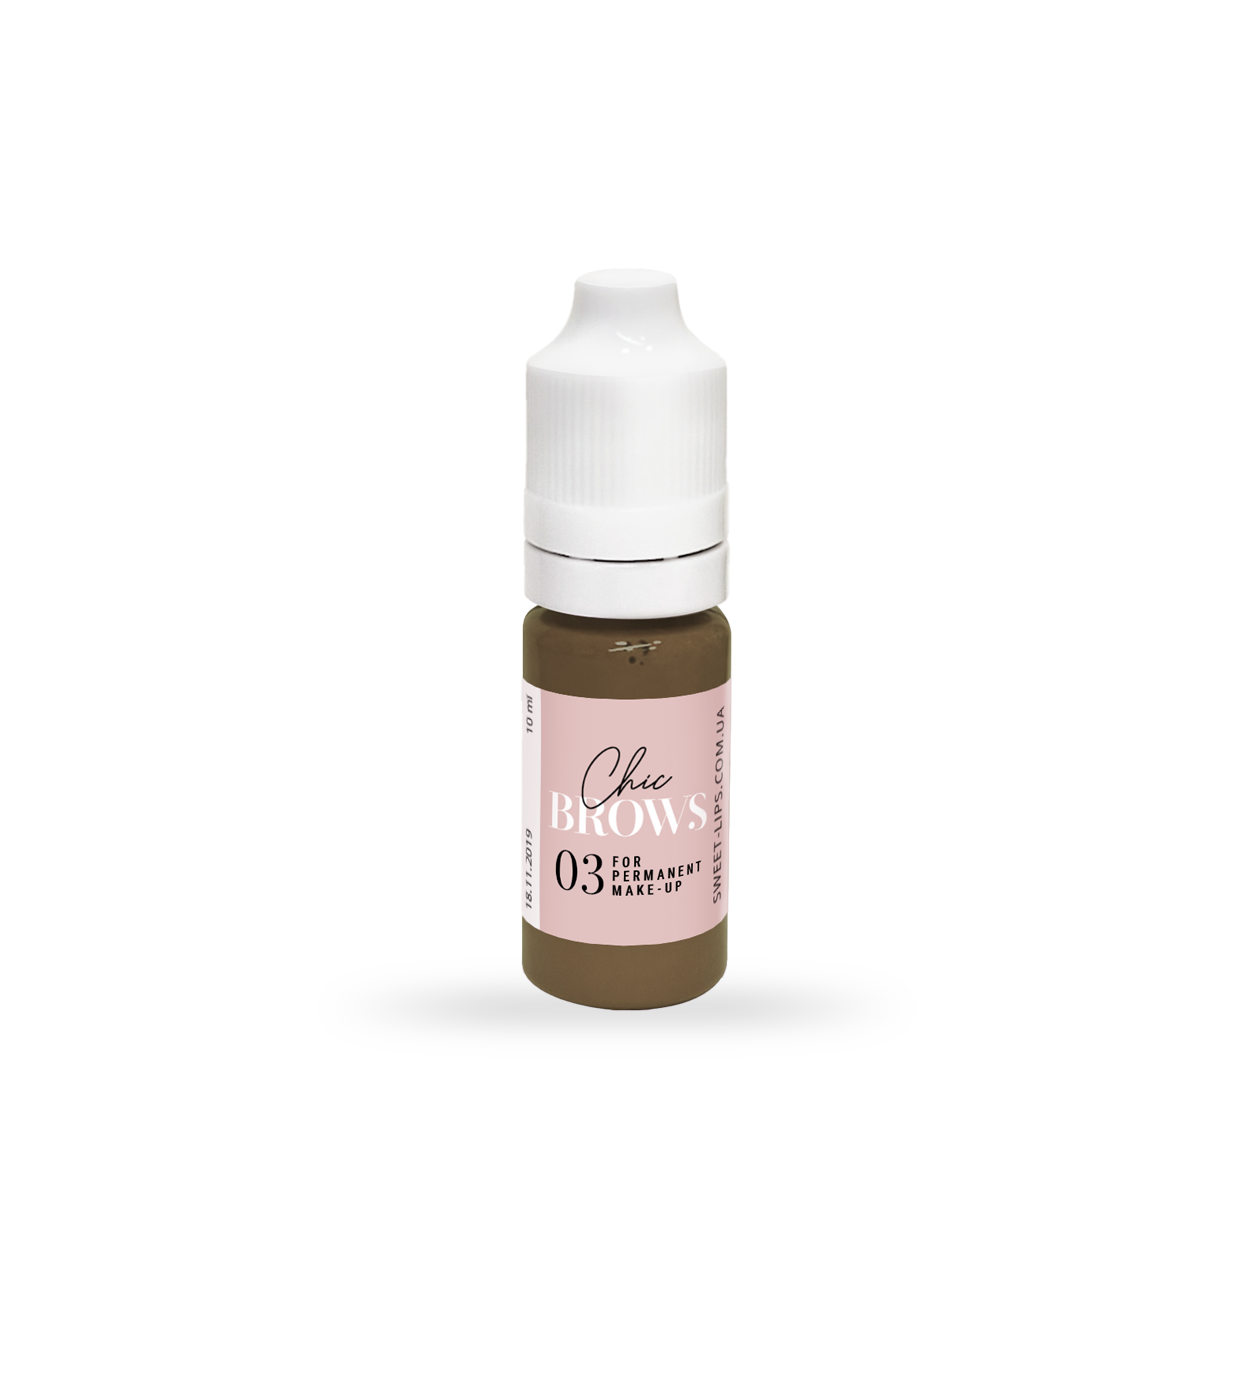 Chic Brows No.3 5ml